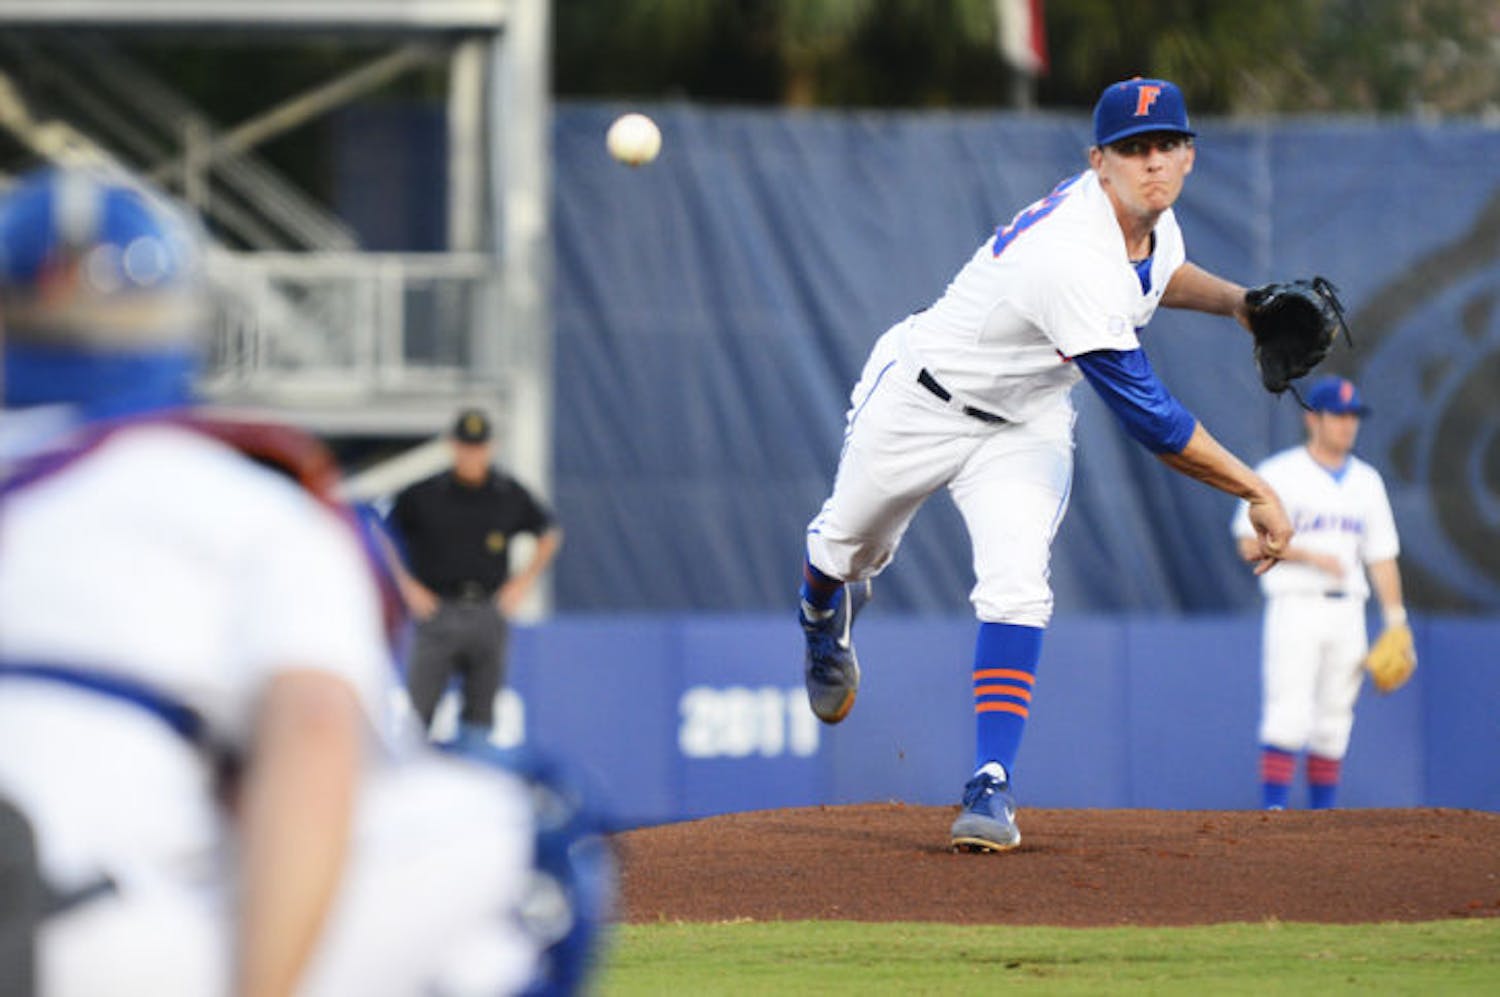 Junior Jonathon Crawford warms up on the mound during Florida’s 3-2 win against South Carolina on April 11 at McKethan Stadium. Crawford and No. 3 seed&nbsp;Florida will face No. 2 seed Austin Peay in its first NCAA Tournament game on Friday.&nbsp;